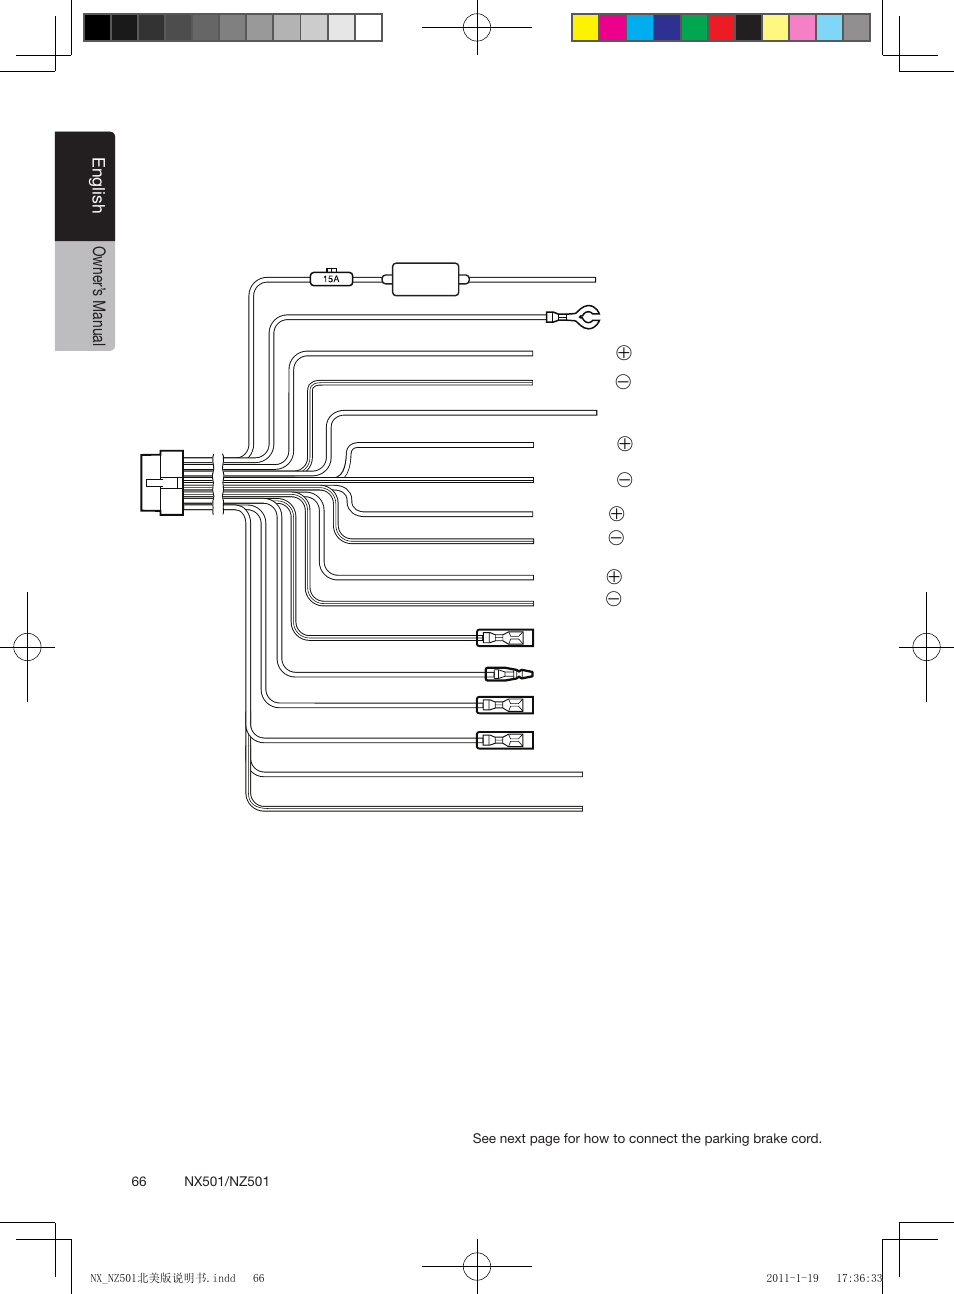 [DIAGRAM] Clarion Vz401 Wiring Diagrams FULL Version HD Quality Wiring